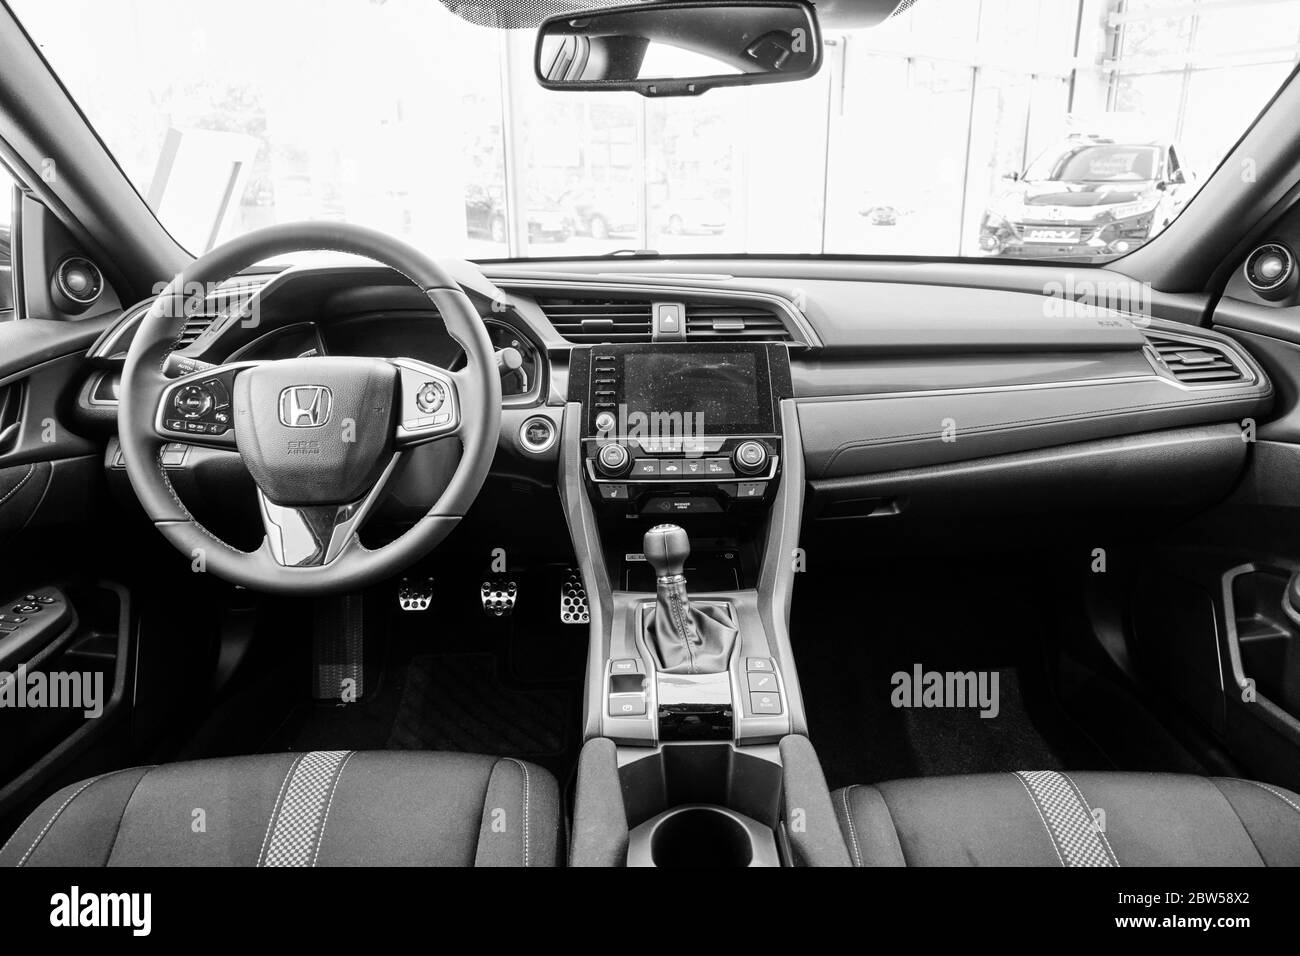 Gdansk, Poland - May 28, Interior accessories of Honda Civic car presented in car showroom Stock Photo - Alamy